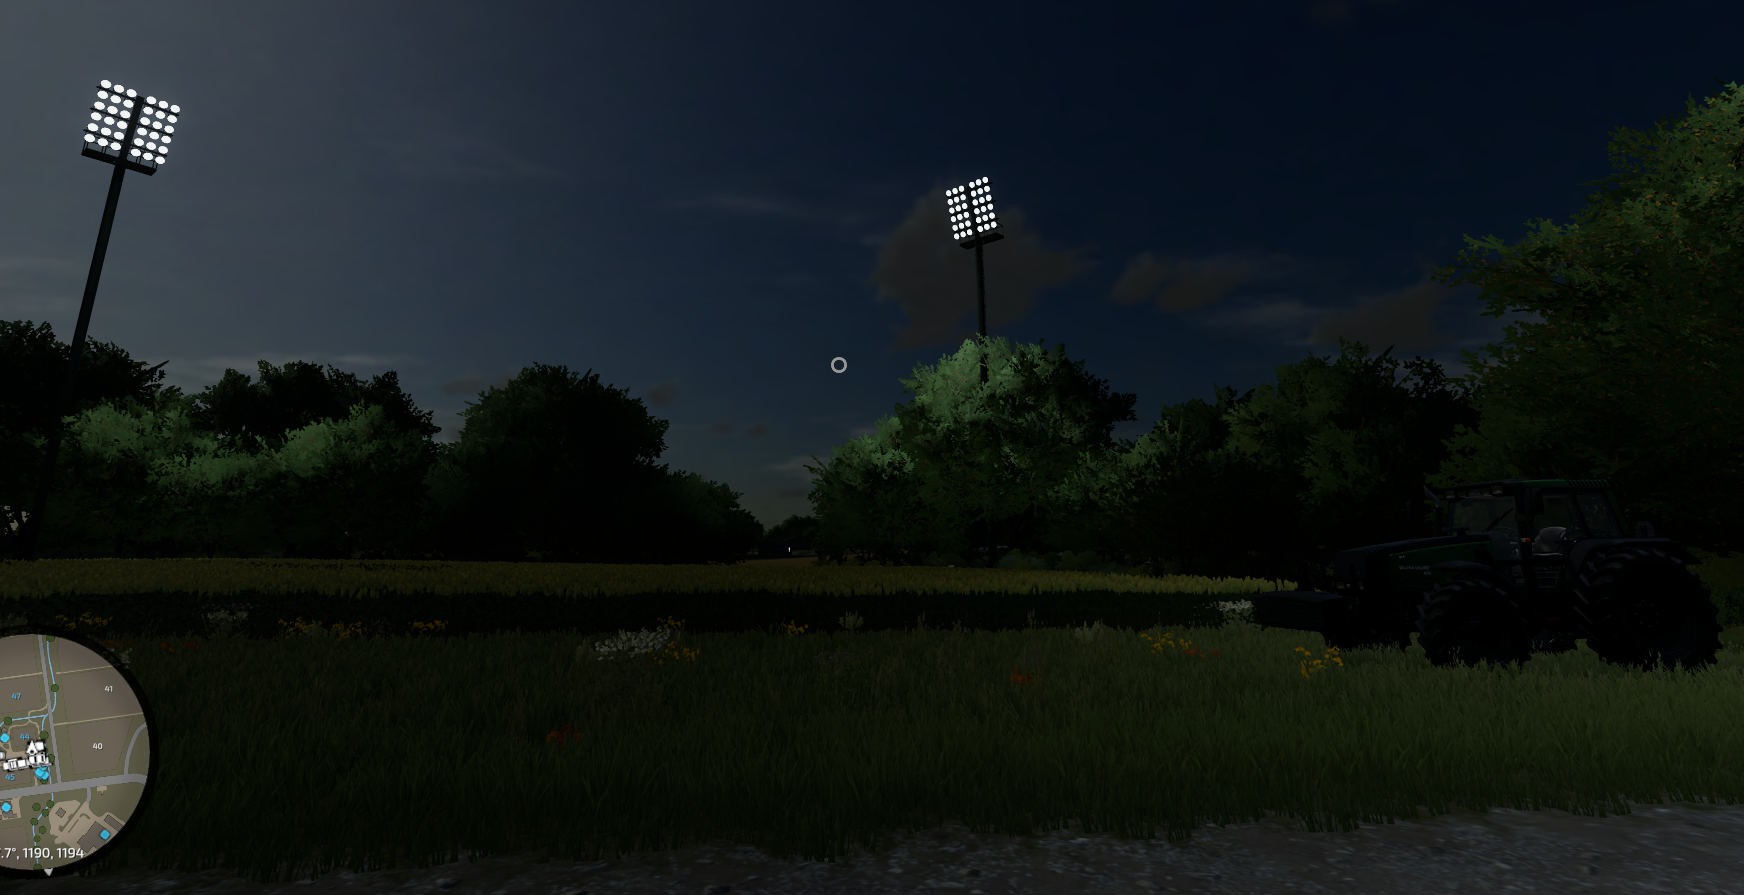 Farming Simulator 22 How to Fix Lighting by Floodlights - The Issue - 9D11ABF